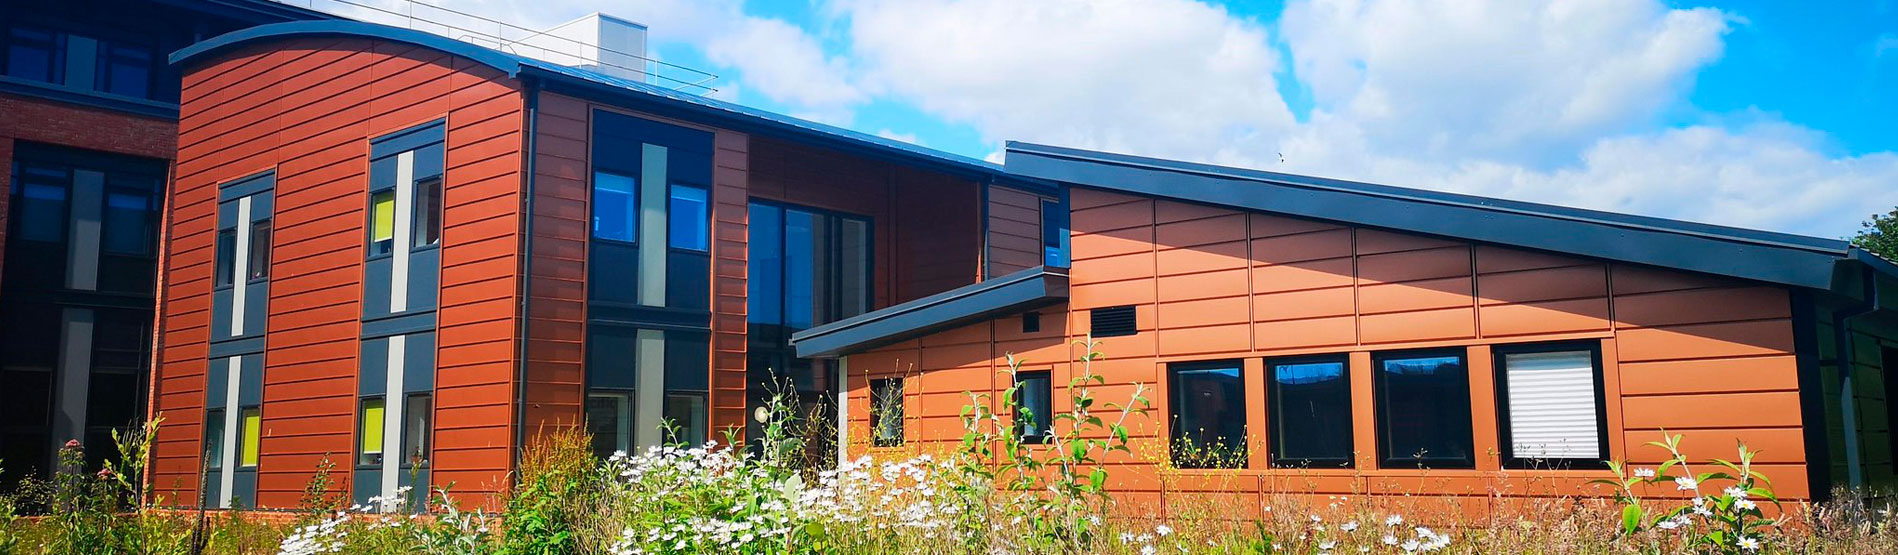 Our innovative Active Buildings® are generating, storing and releasing their own energy